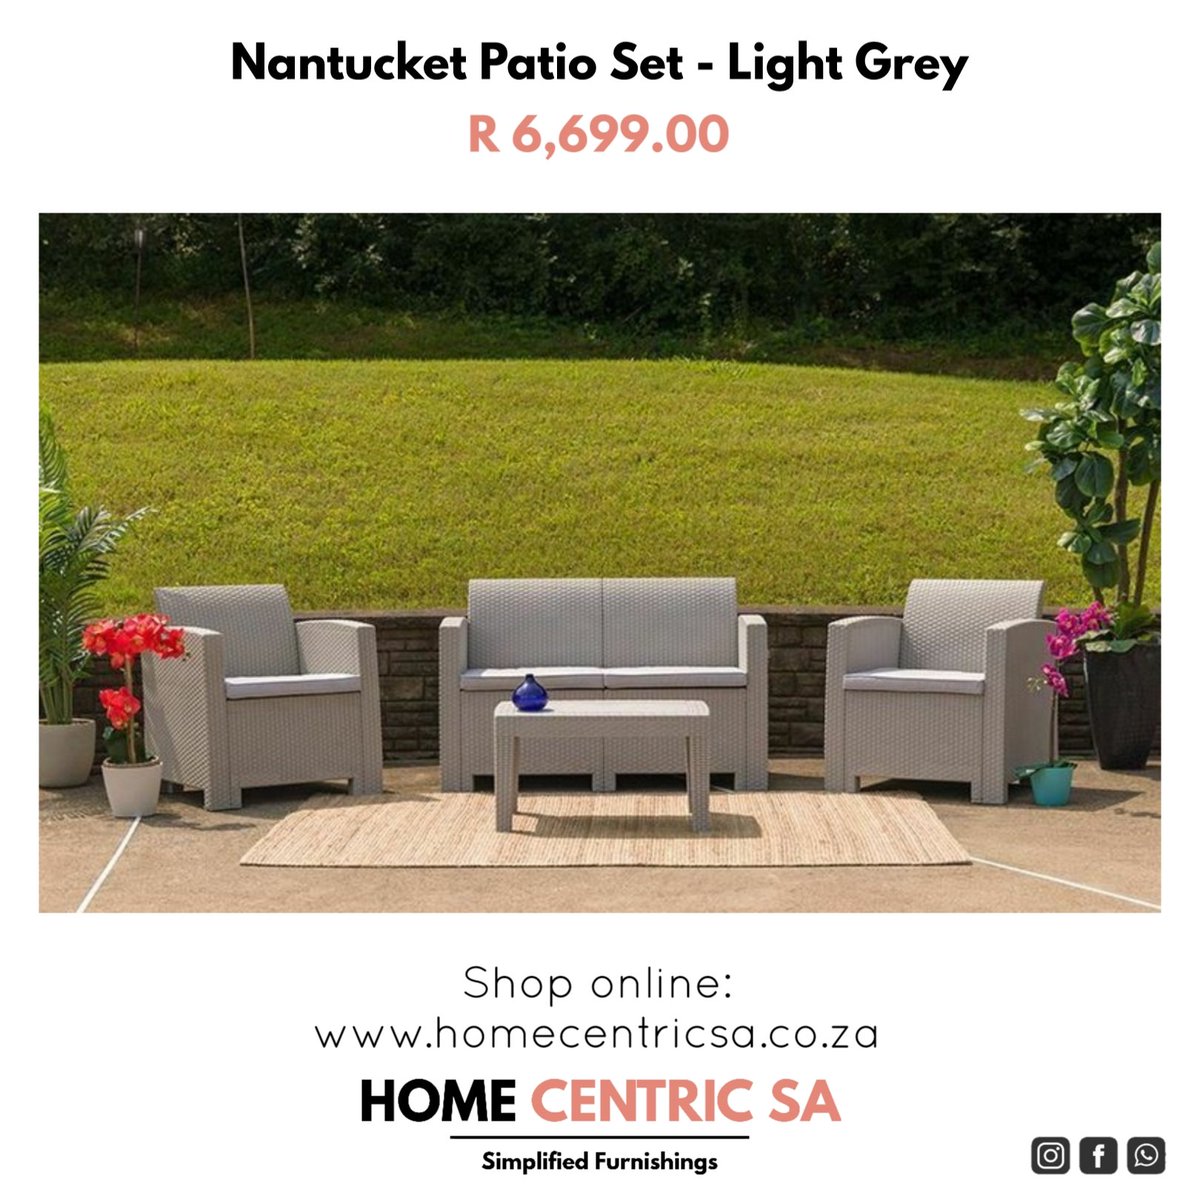 Shop online: 
homecentricsa.co.za

#home #furniture #decor #outdoor #outdoorfurniture #patioset #table #chairs #outdoordining #breakfast #lunch #dinner #chilledmoments #relaxation #comfort #modernfurniture #weatherproof